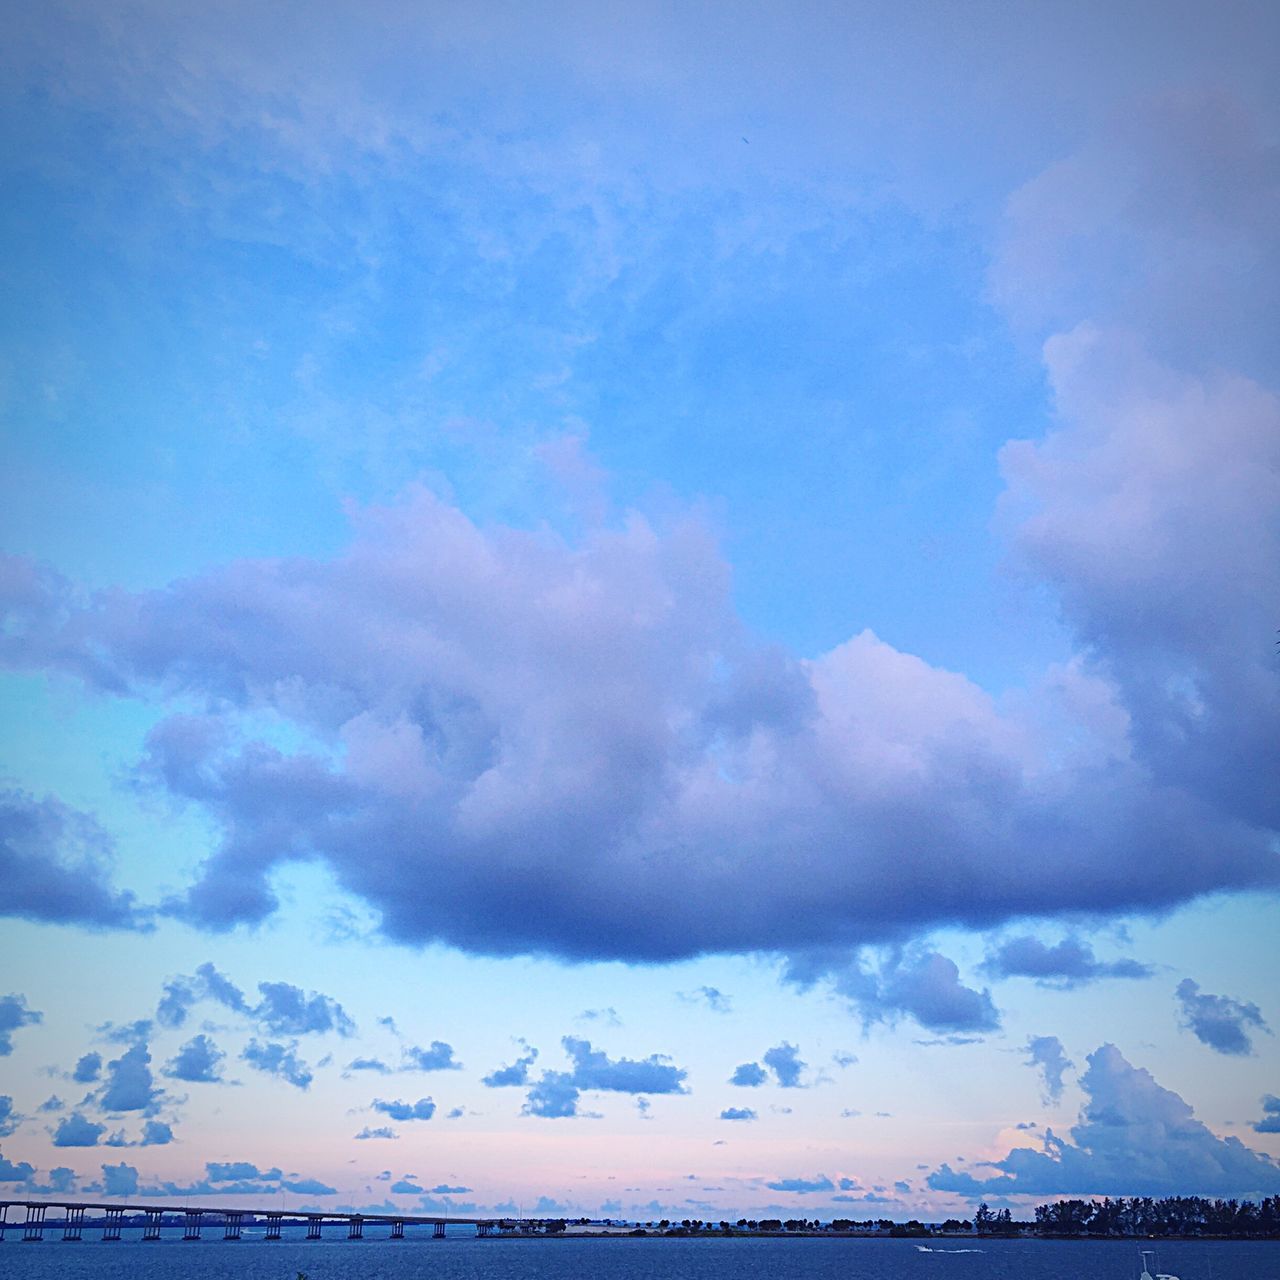 sky, scenics, tranquil scene, tranquility, beauty in nature, cloud - sky, cloudy, nature, sea, cloud, idyllic, blue, cloudscape, water, horizon over water, waterfront, weather, outdoors, no people, majestic